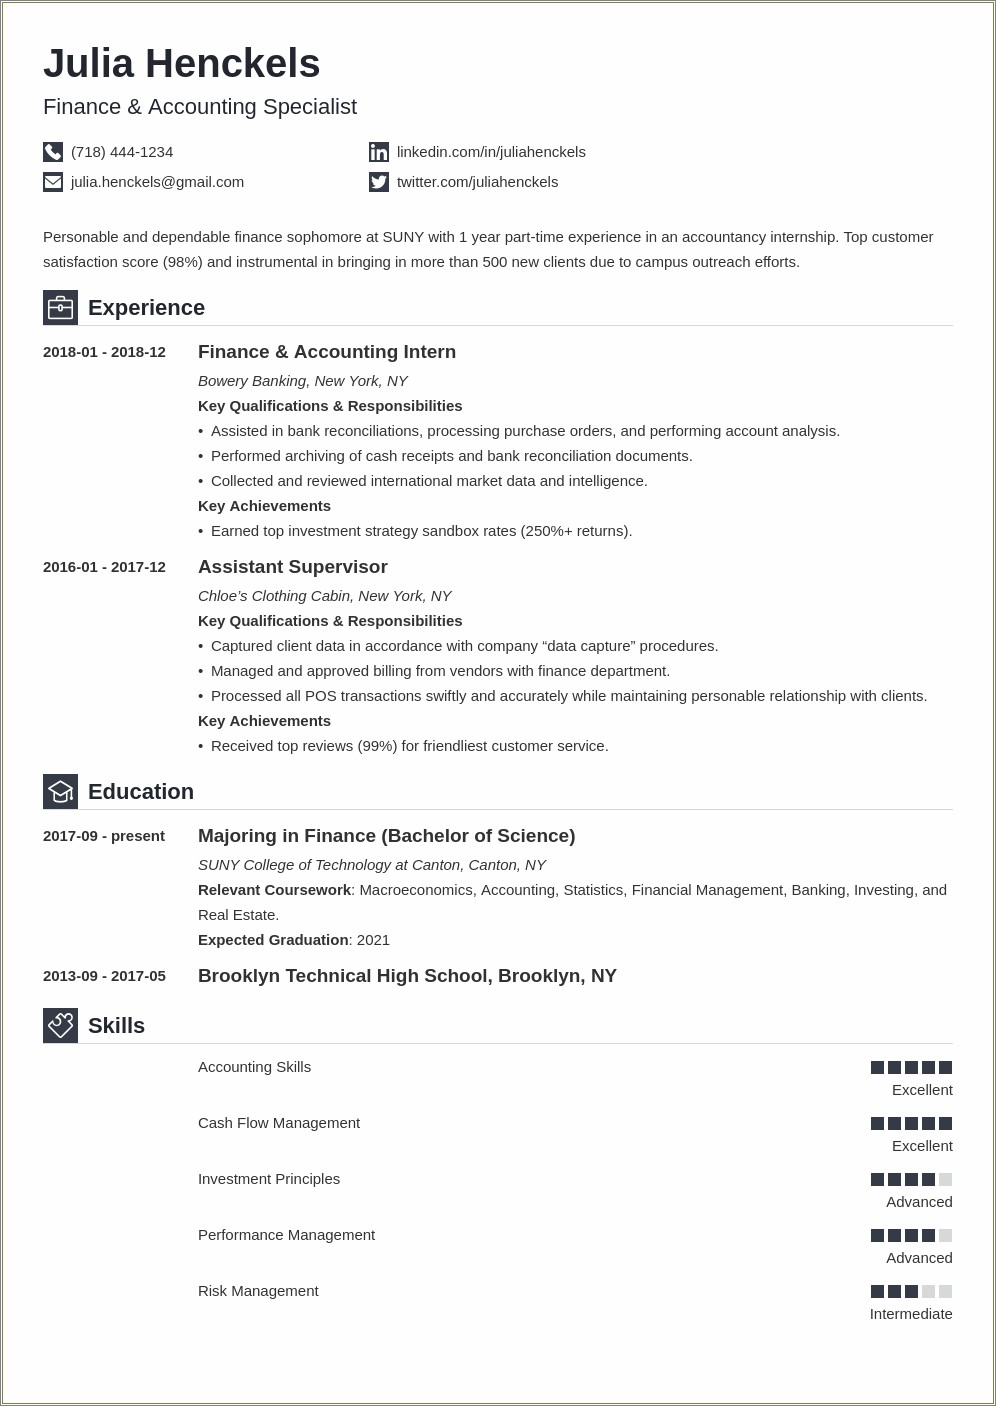 Resume Samples For College Students Pdf